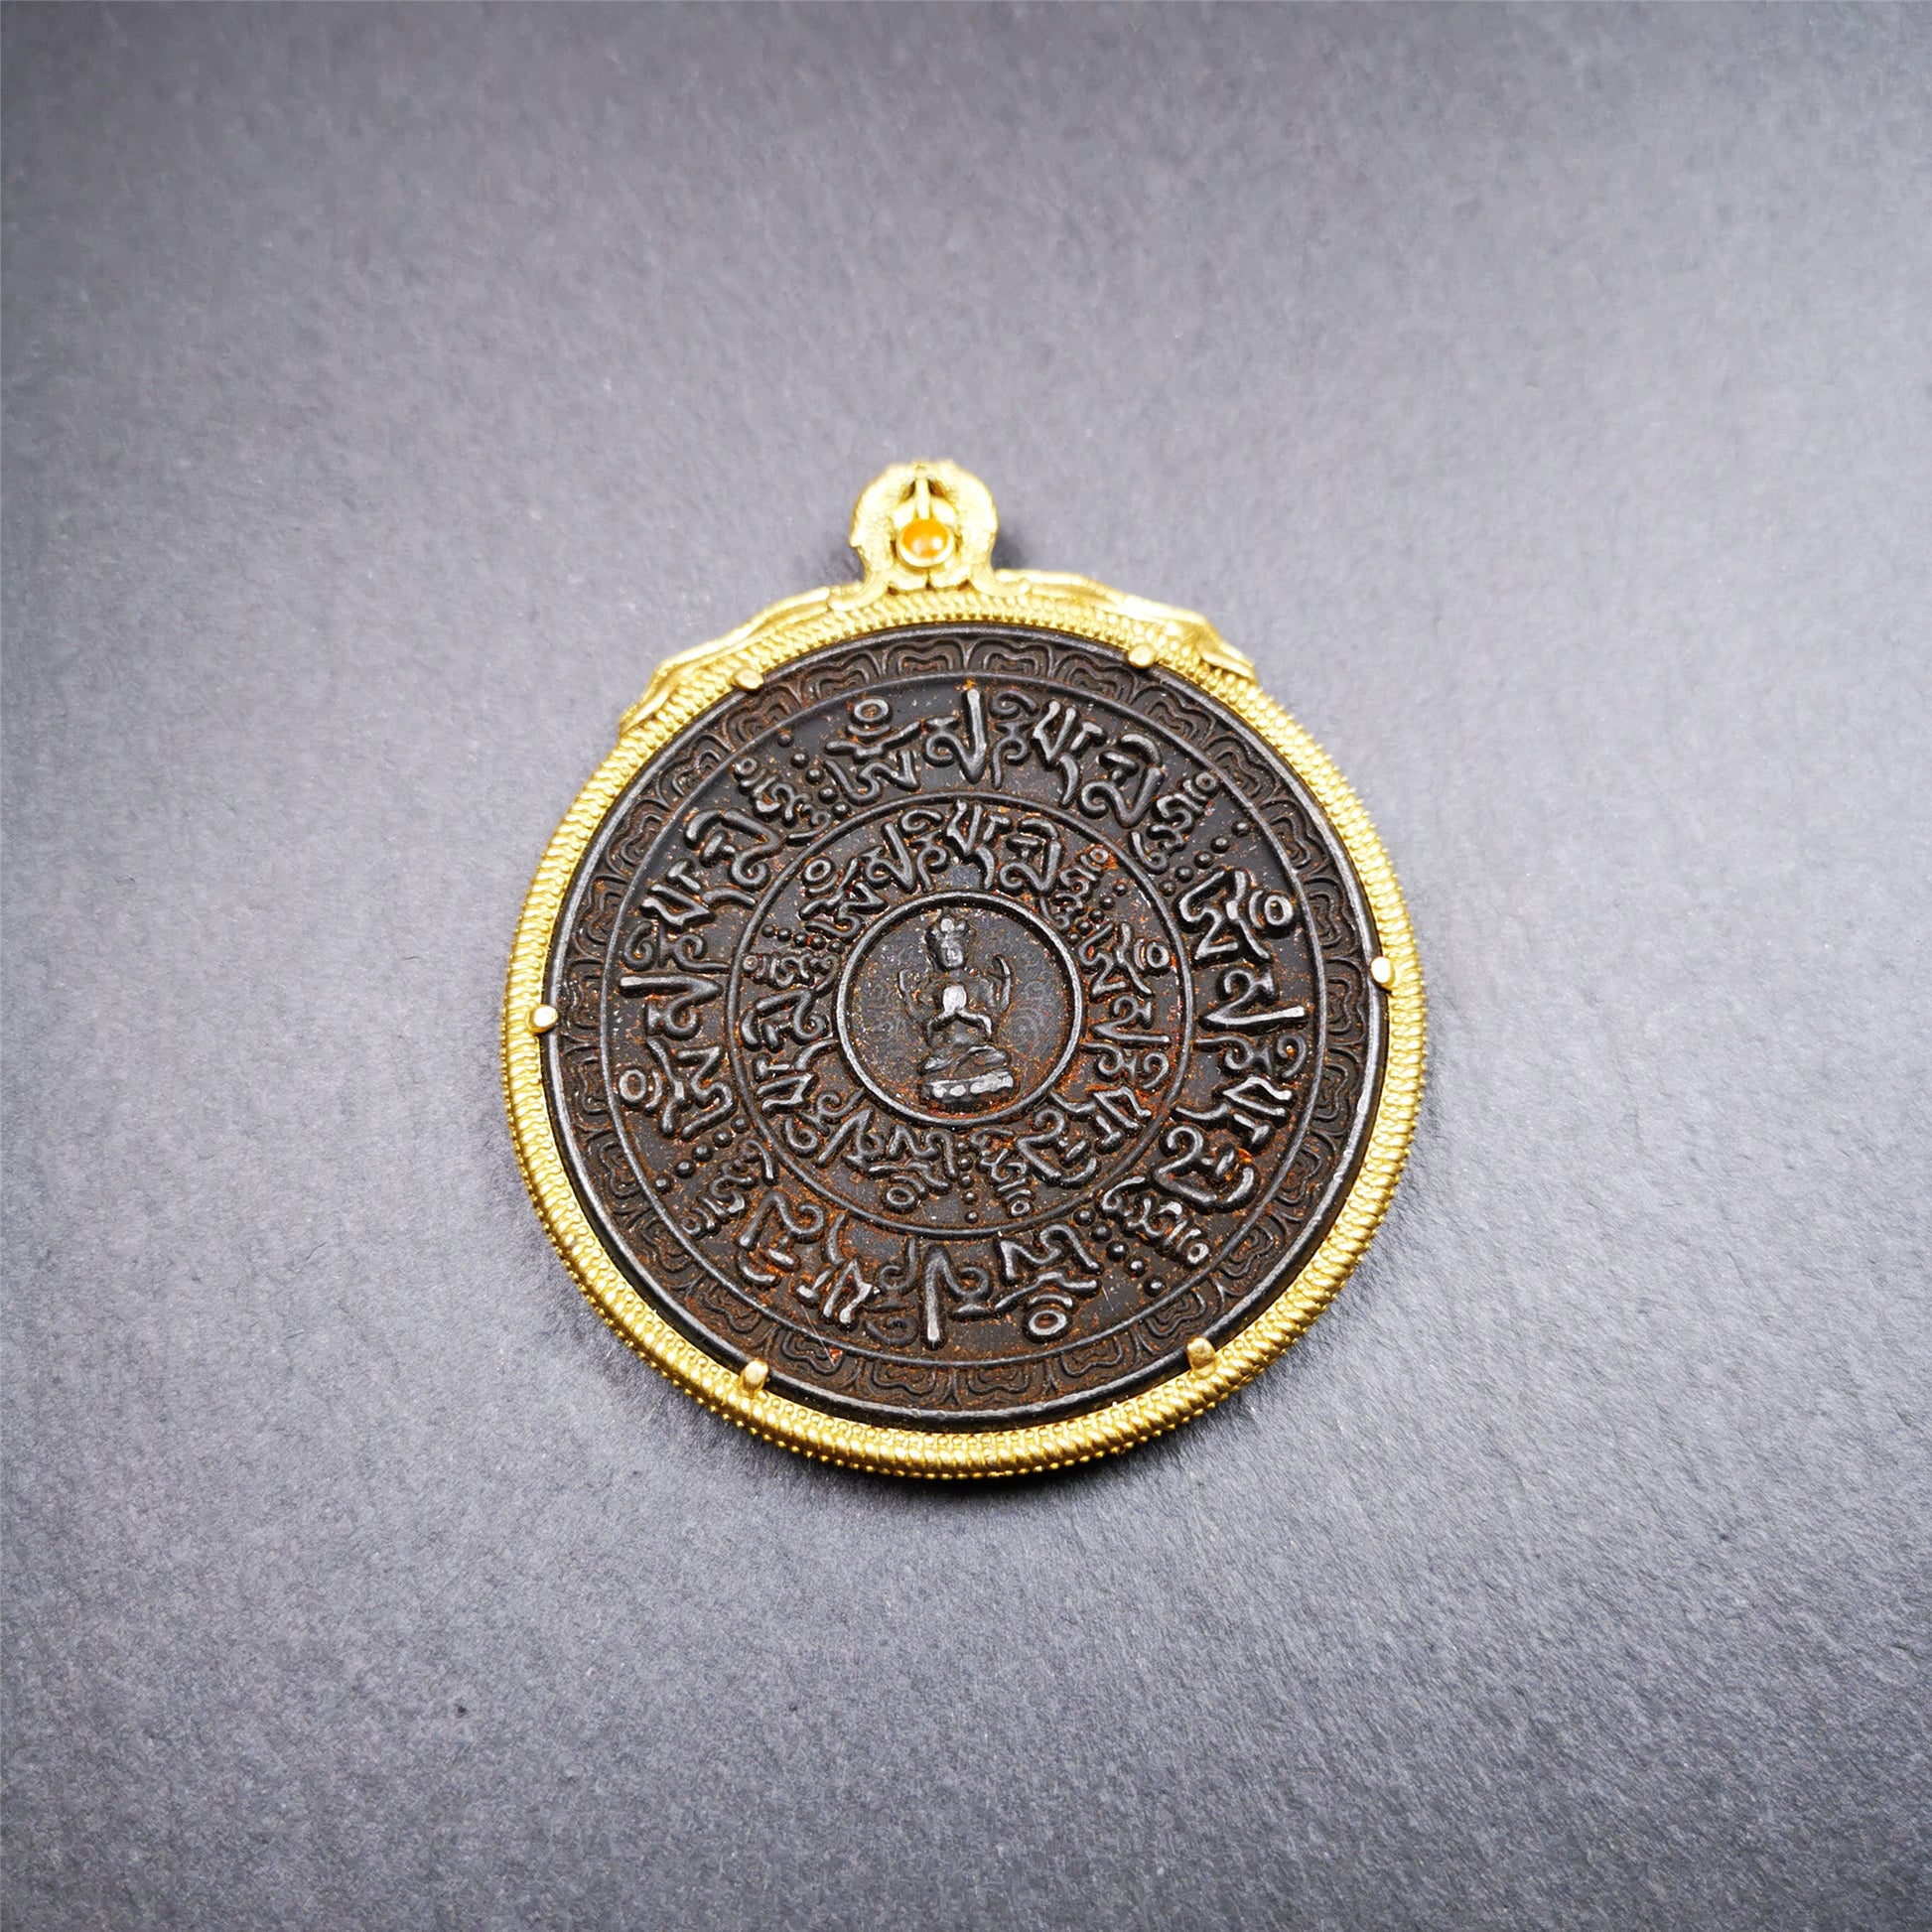 This badge was made by Tibetan craftsmen and come from Hepo Town, Baiyu County,Tibet. It is made of thokcha, edging with copper, 2.1 diameter. The mantra Om Mani Padme Hum is arranged in concentric circles around the chenrezig.